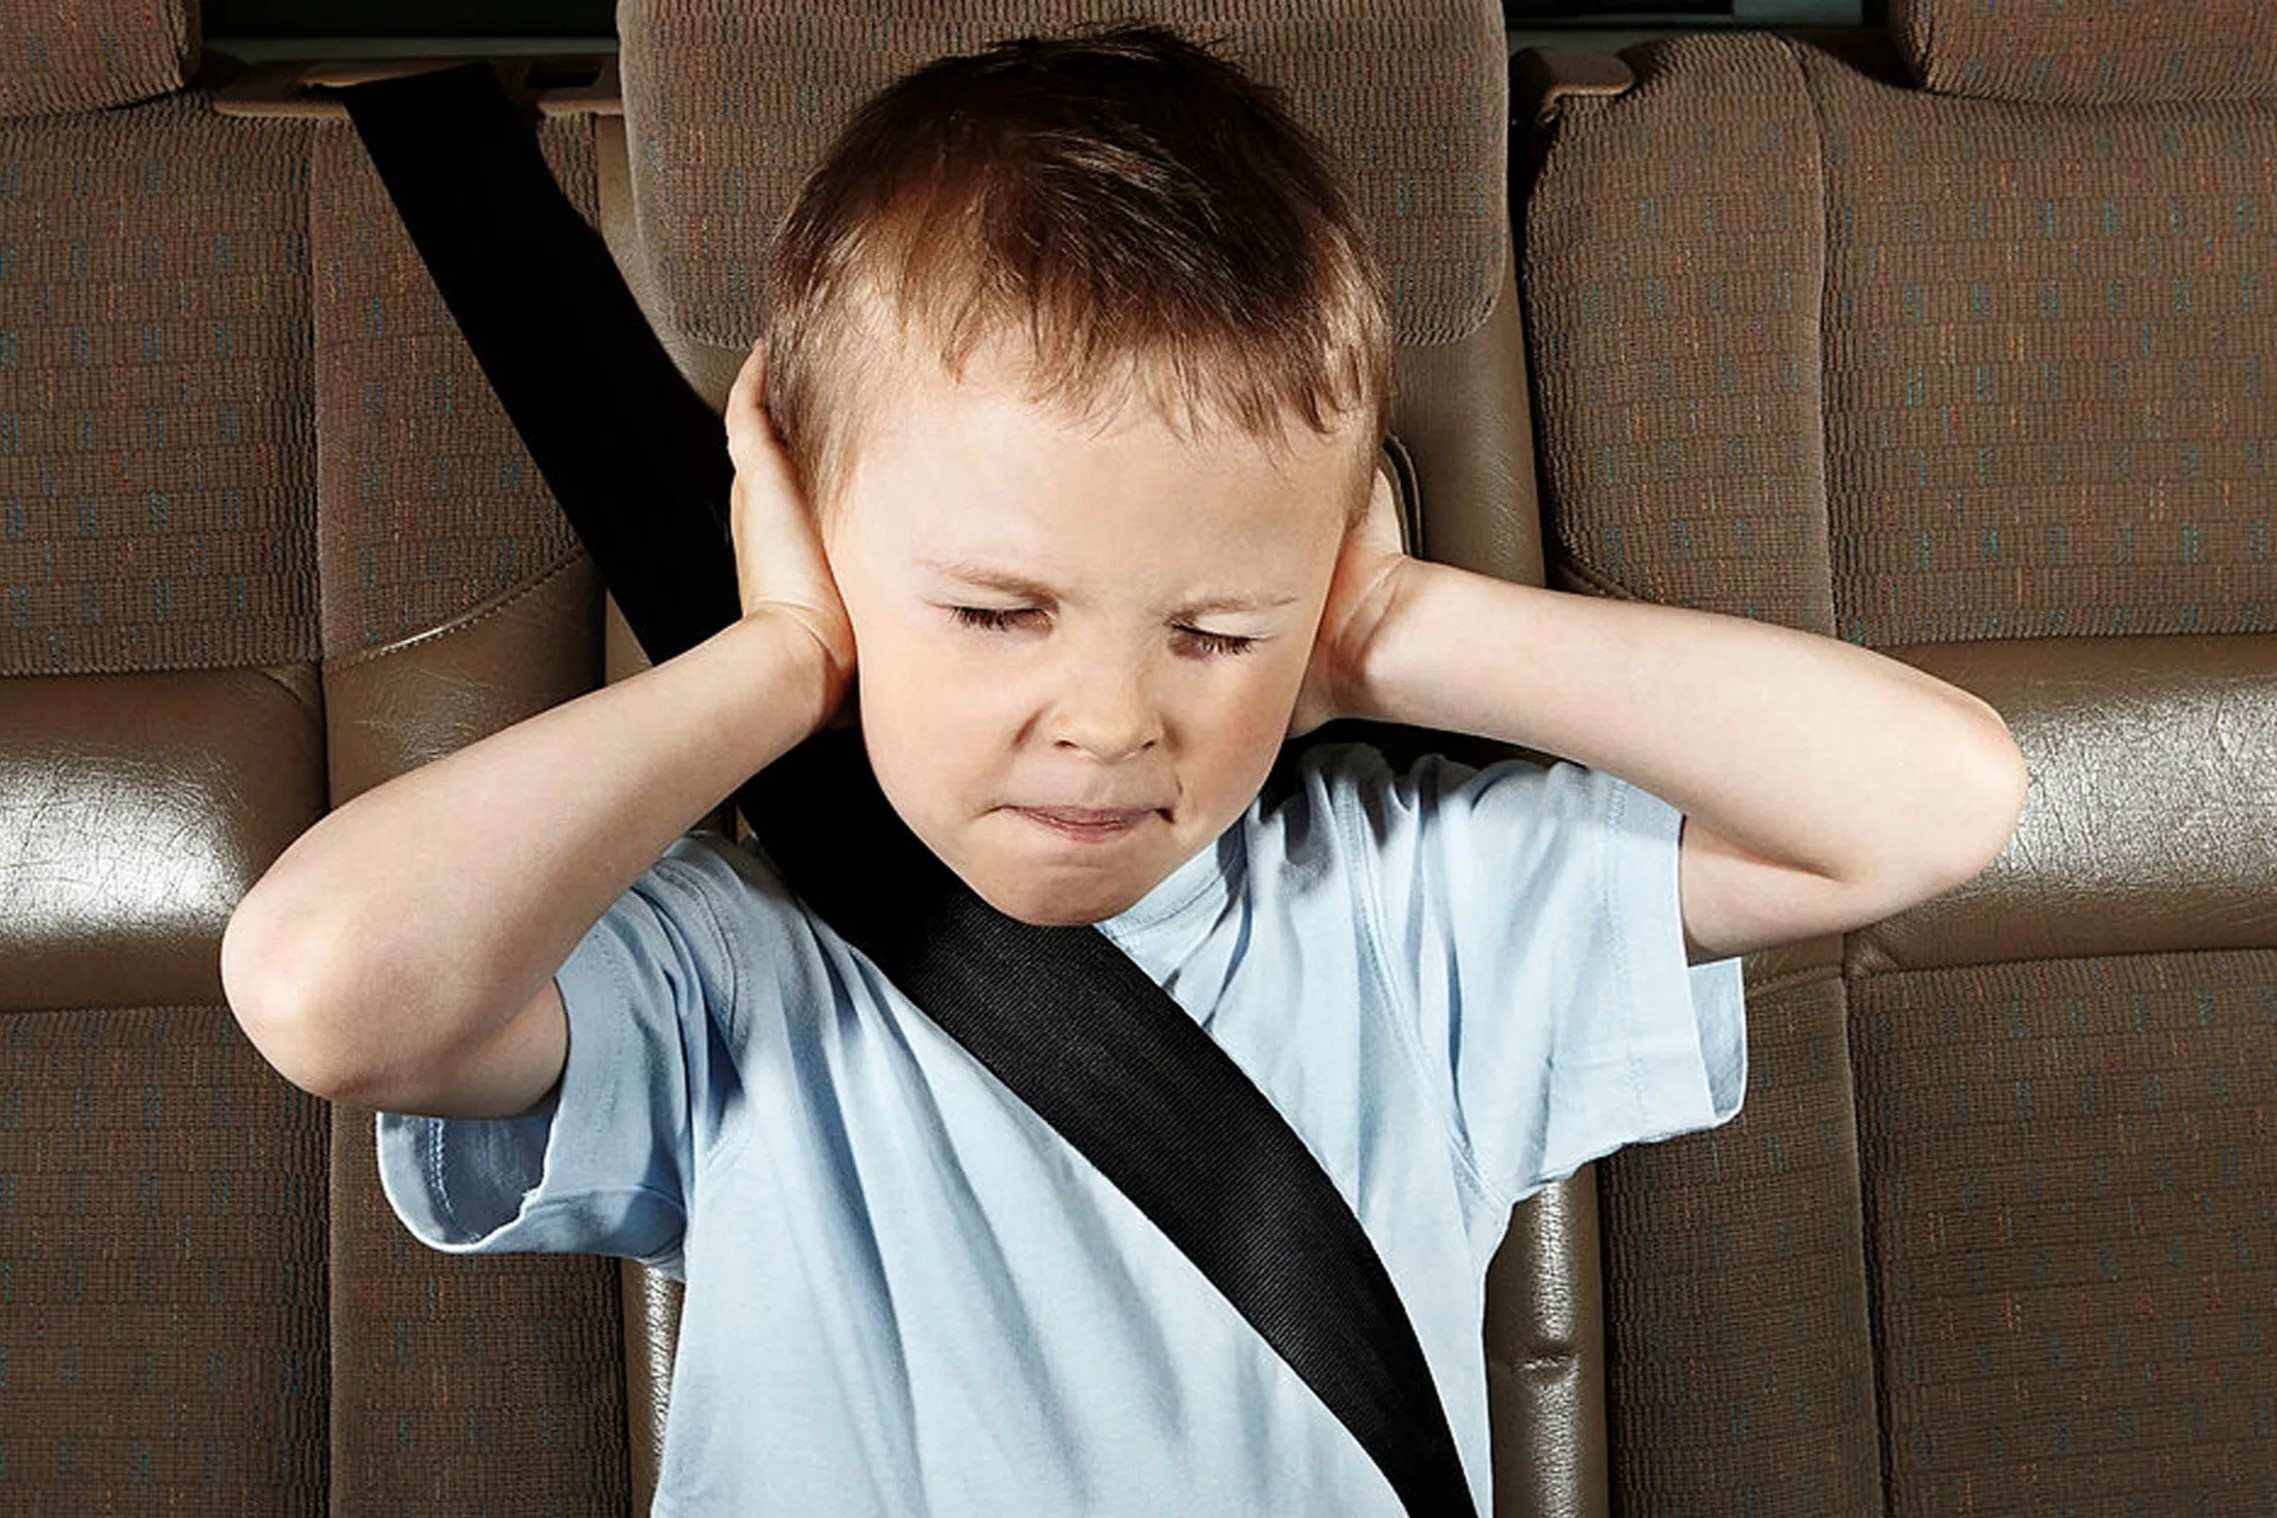 Say Goodbye To That Annoying Squeaking Noise In Your Car With This Simple Trick!